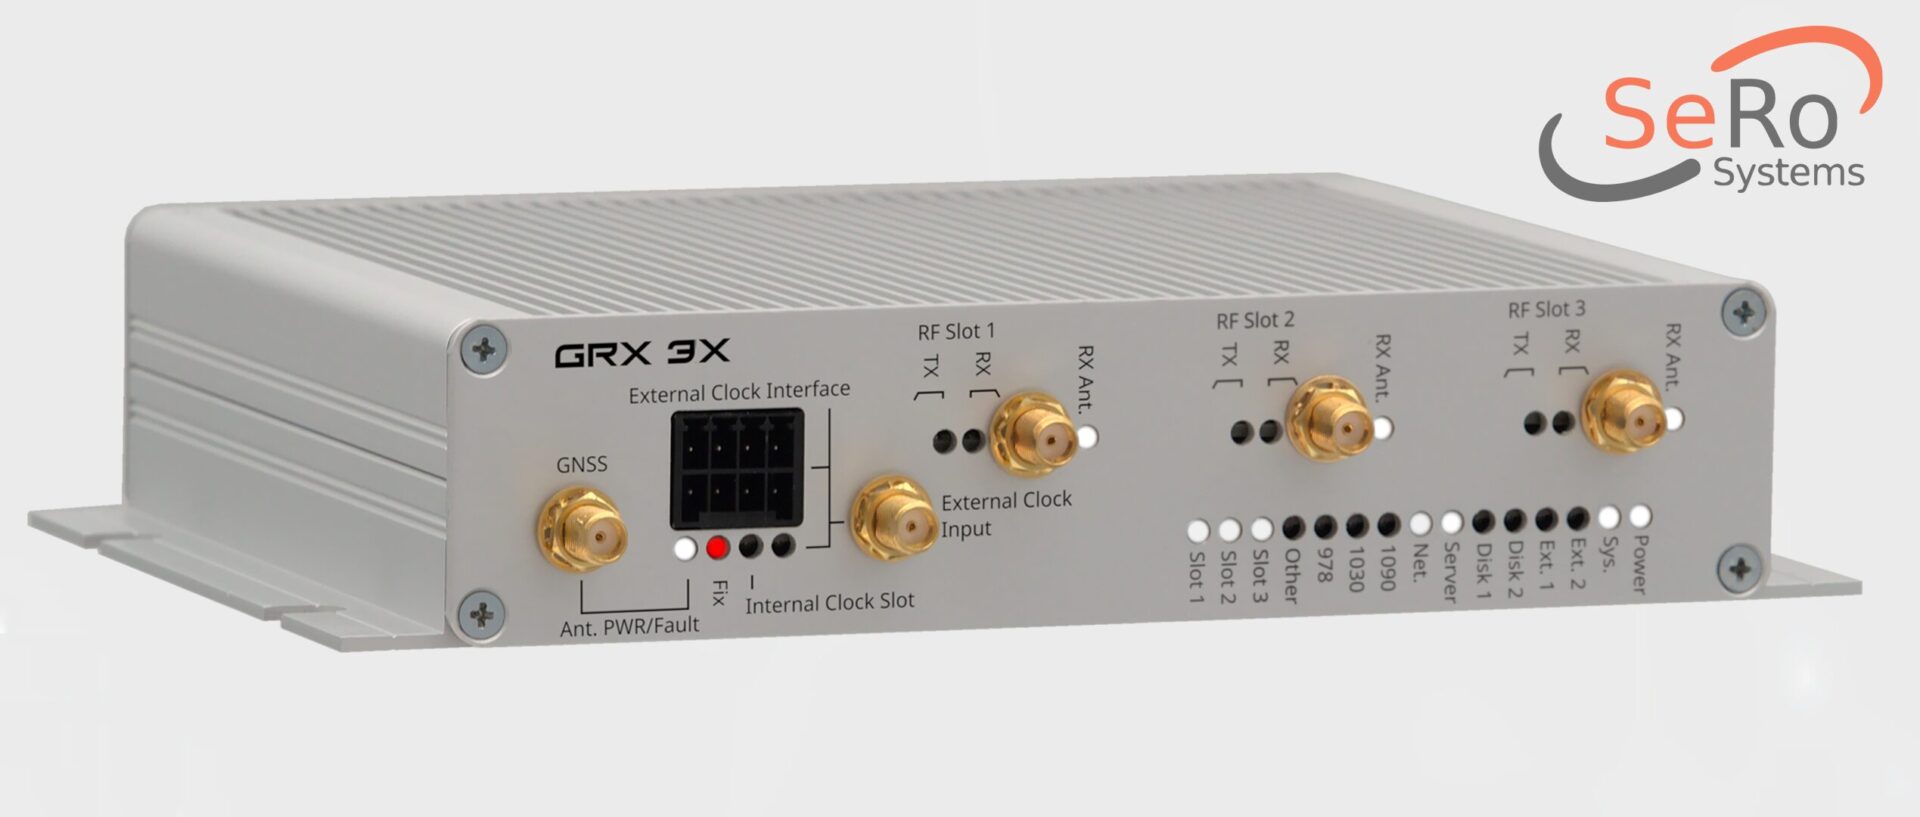 SeRo Unveils its State-of-the-Art GRX 3X Multi-Band Receiver 